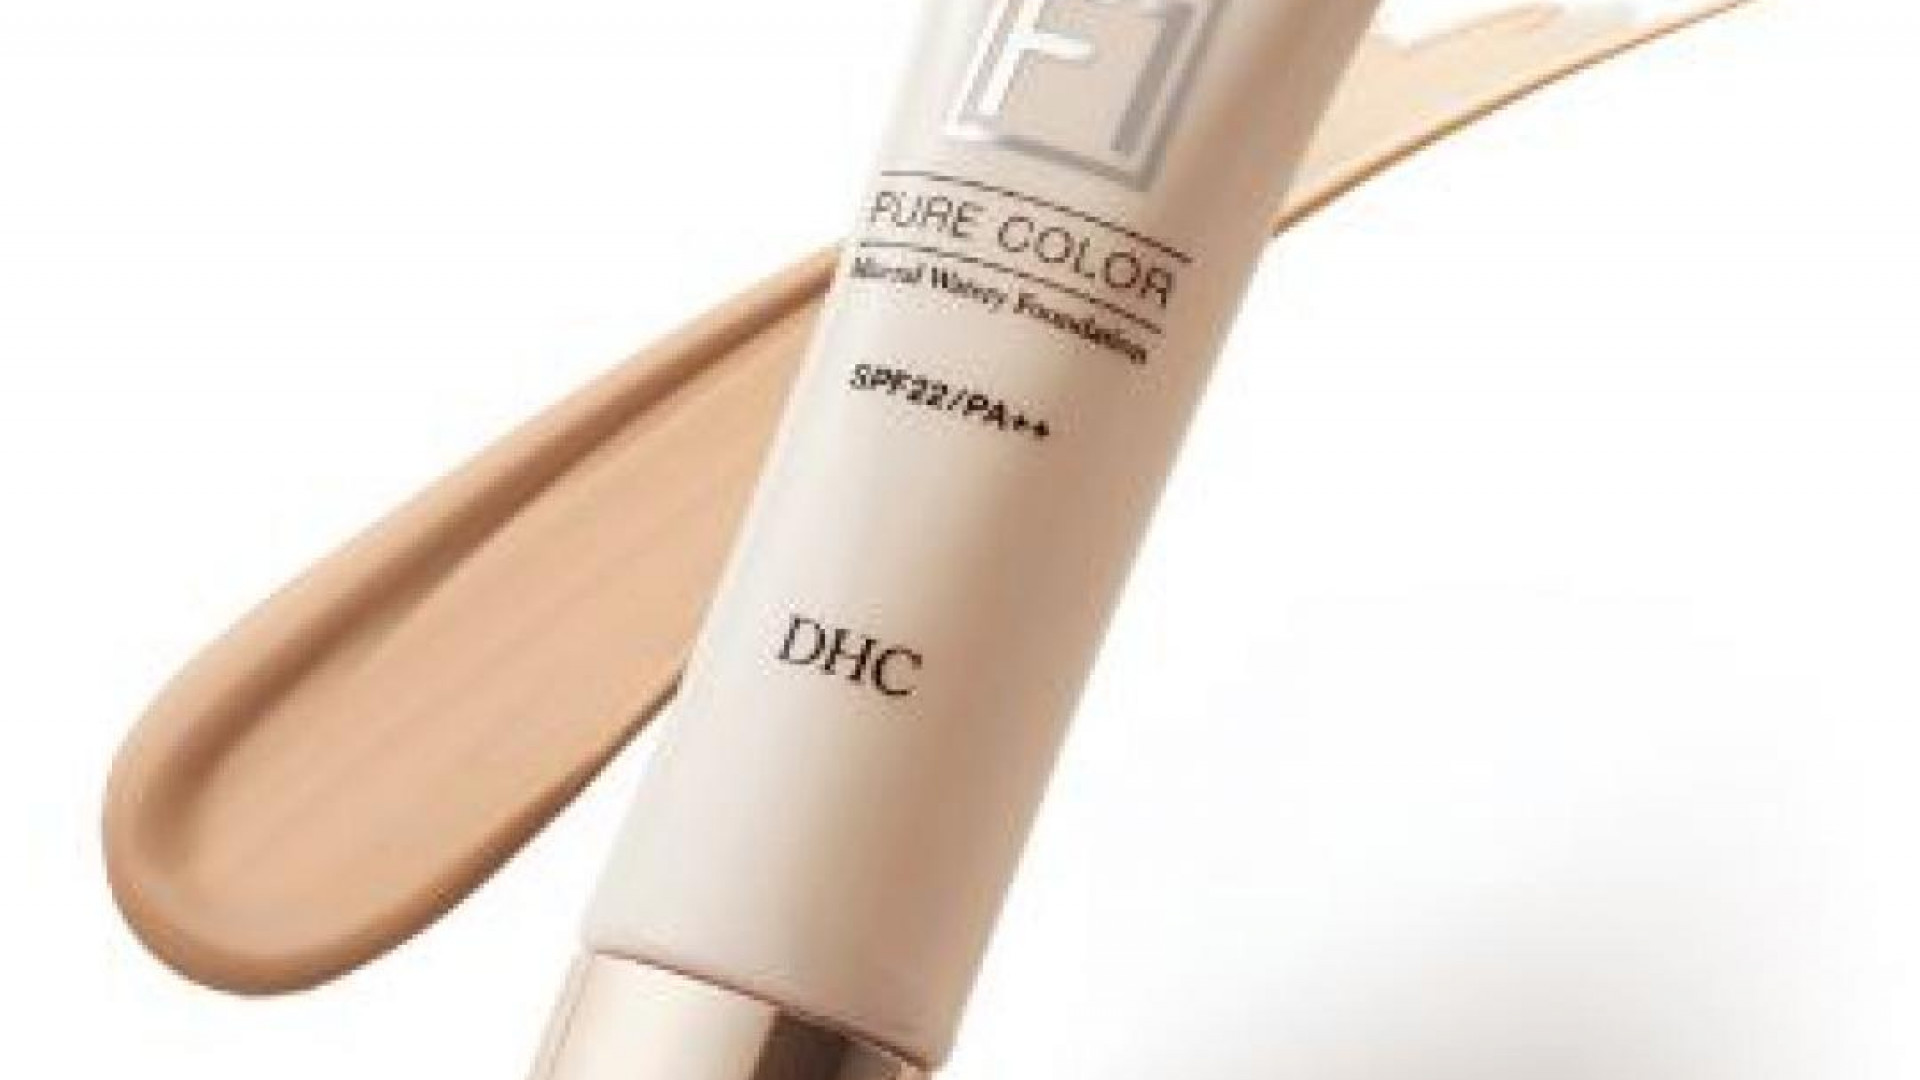 Fond de ten DHC Mineral Watery Pure Color